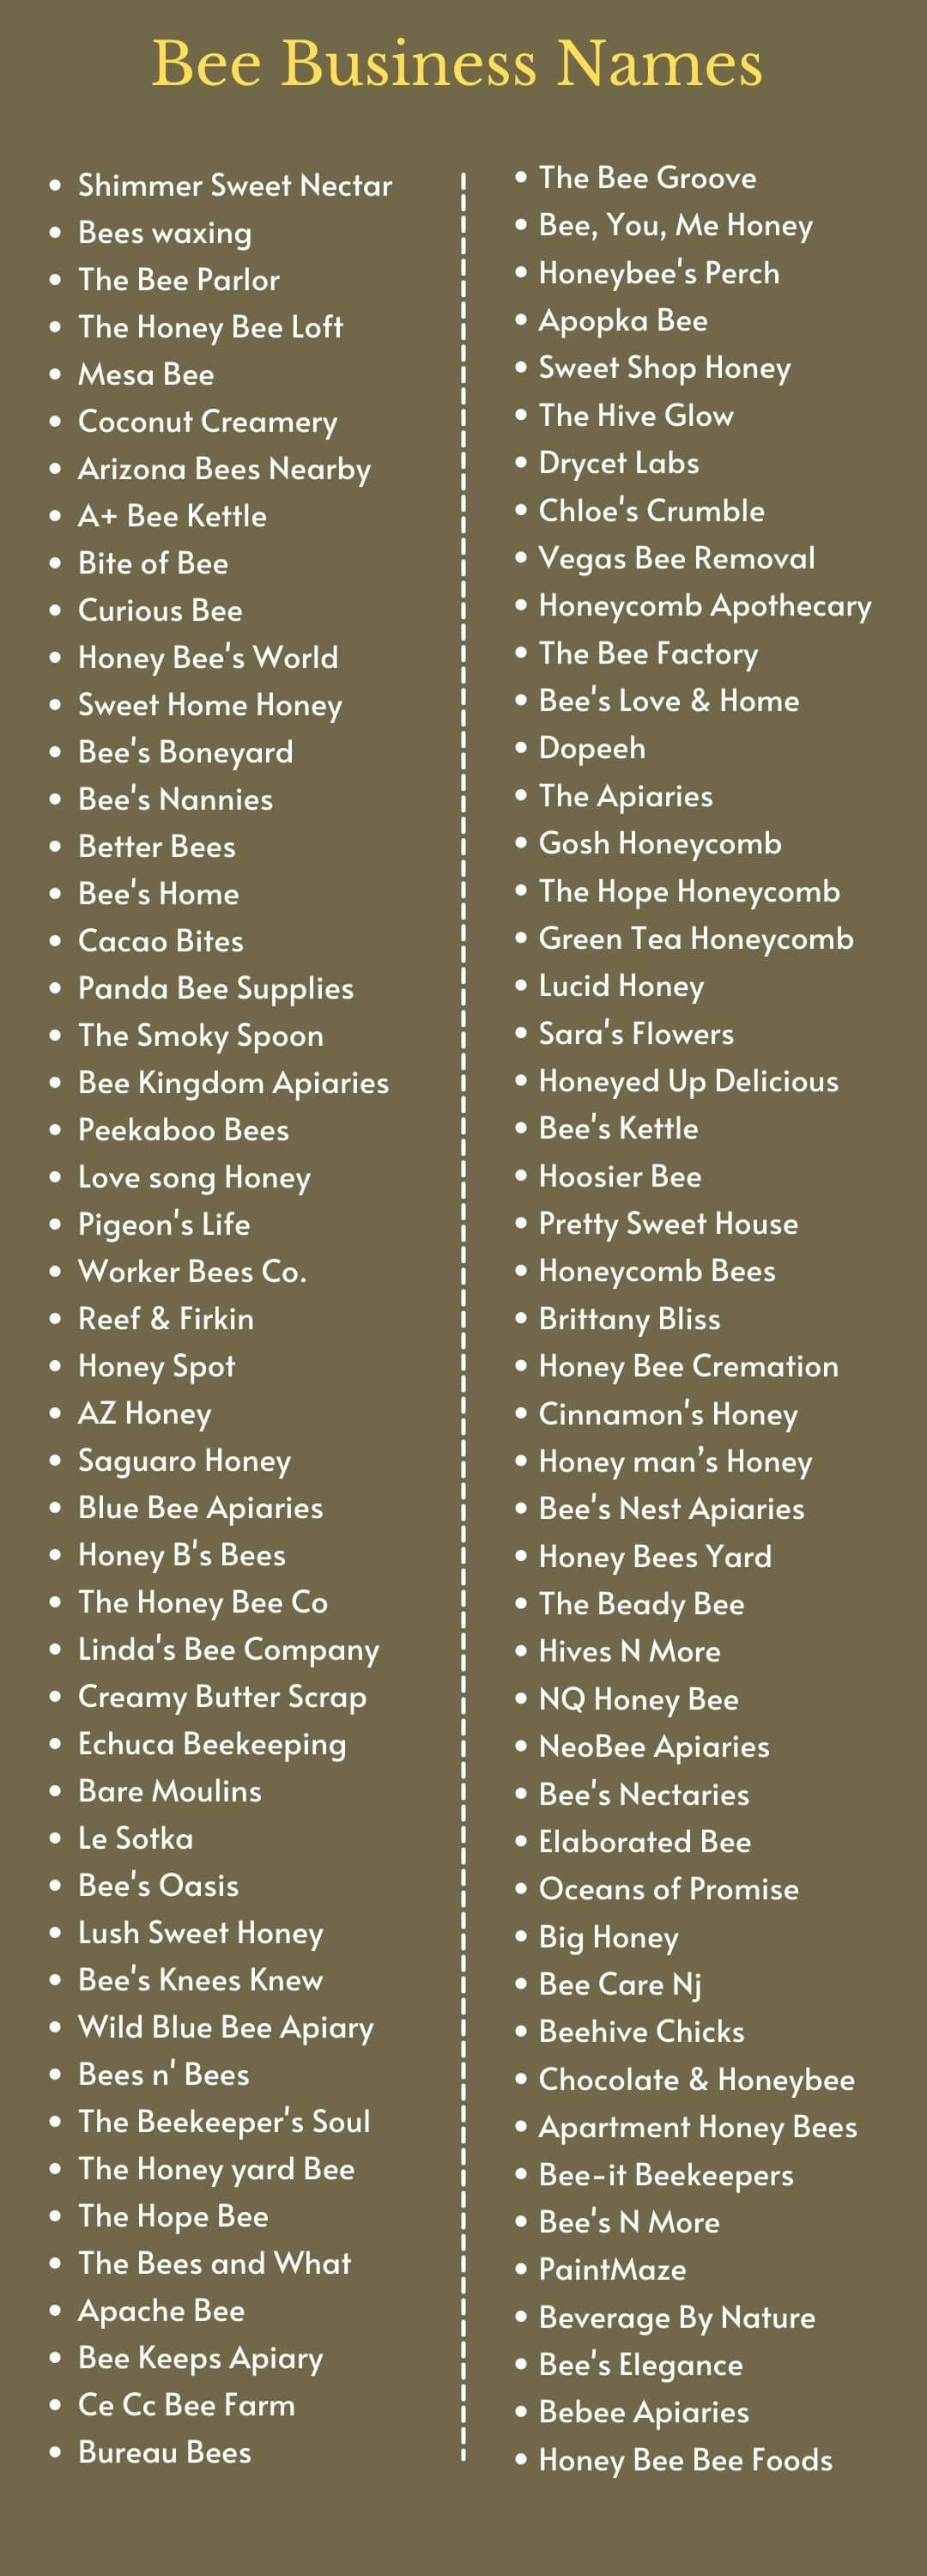 Bee Business Names: Infographic